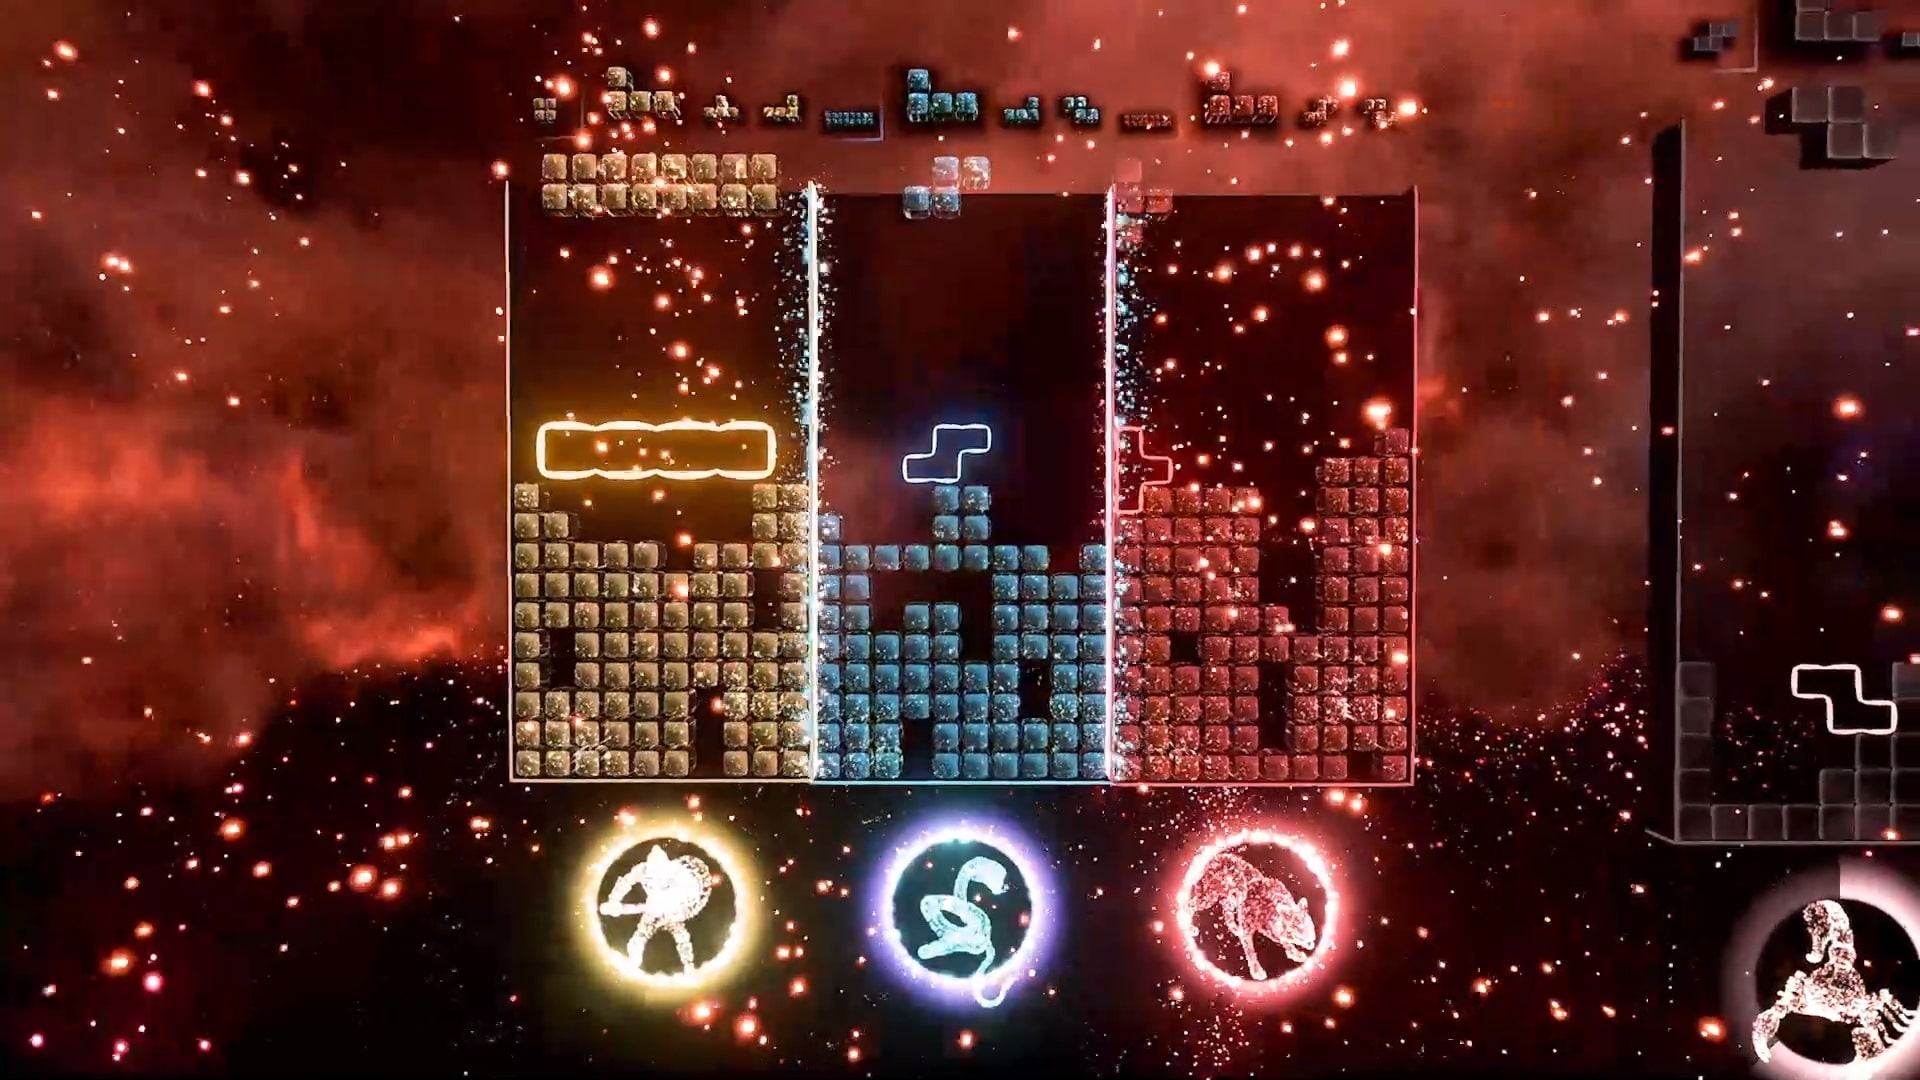 tetris effect connected mode co-op gameplay